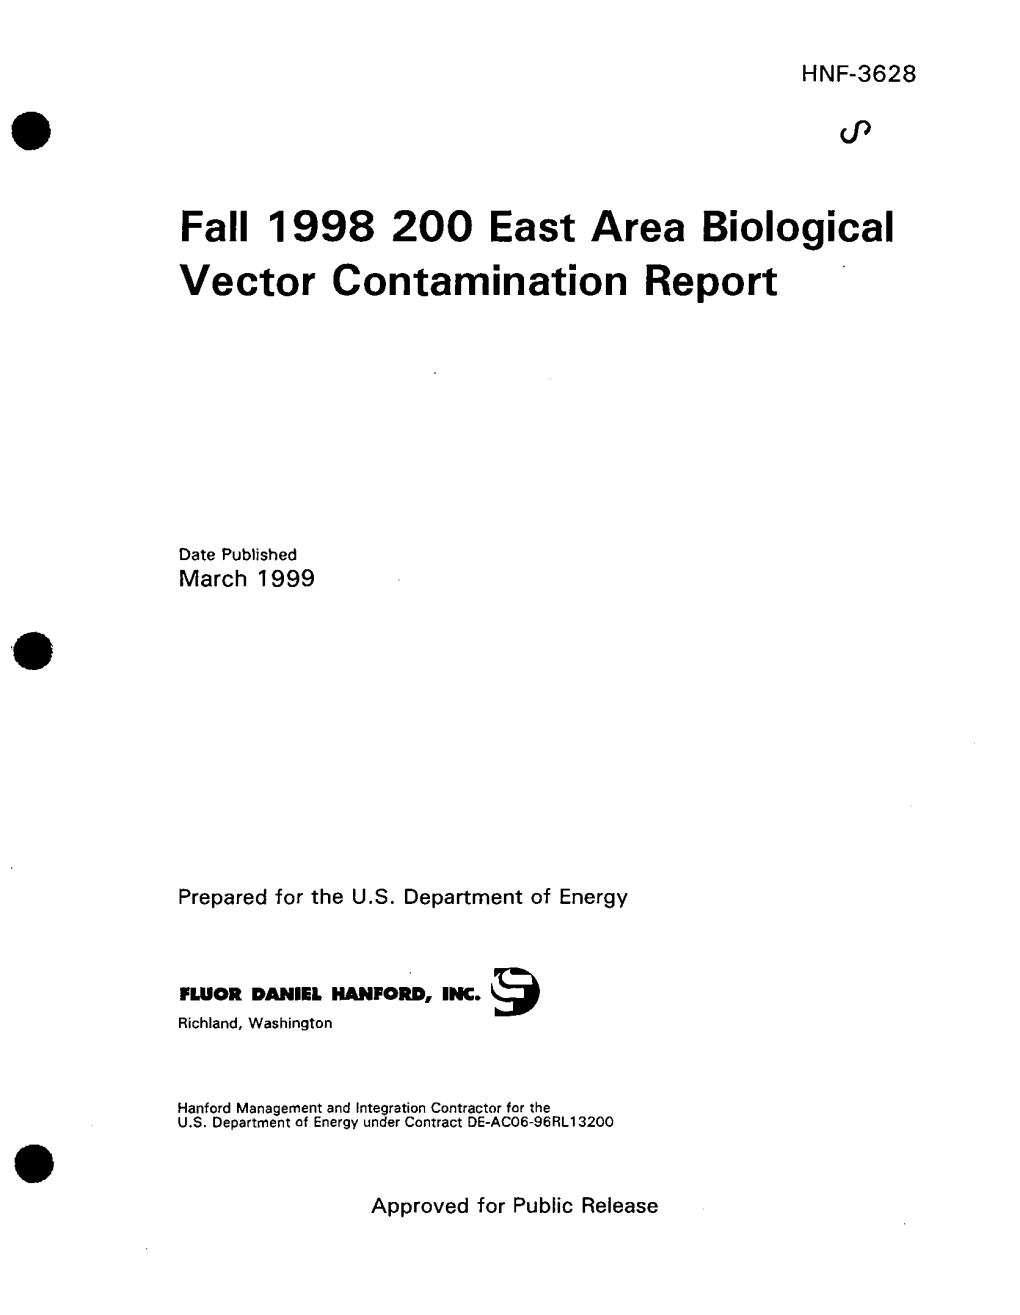 Fall 1998 200 East Area Biological Vector Contamination Report